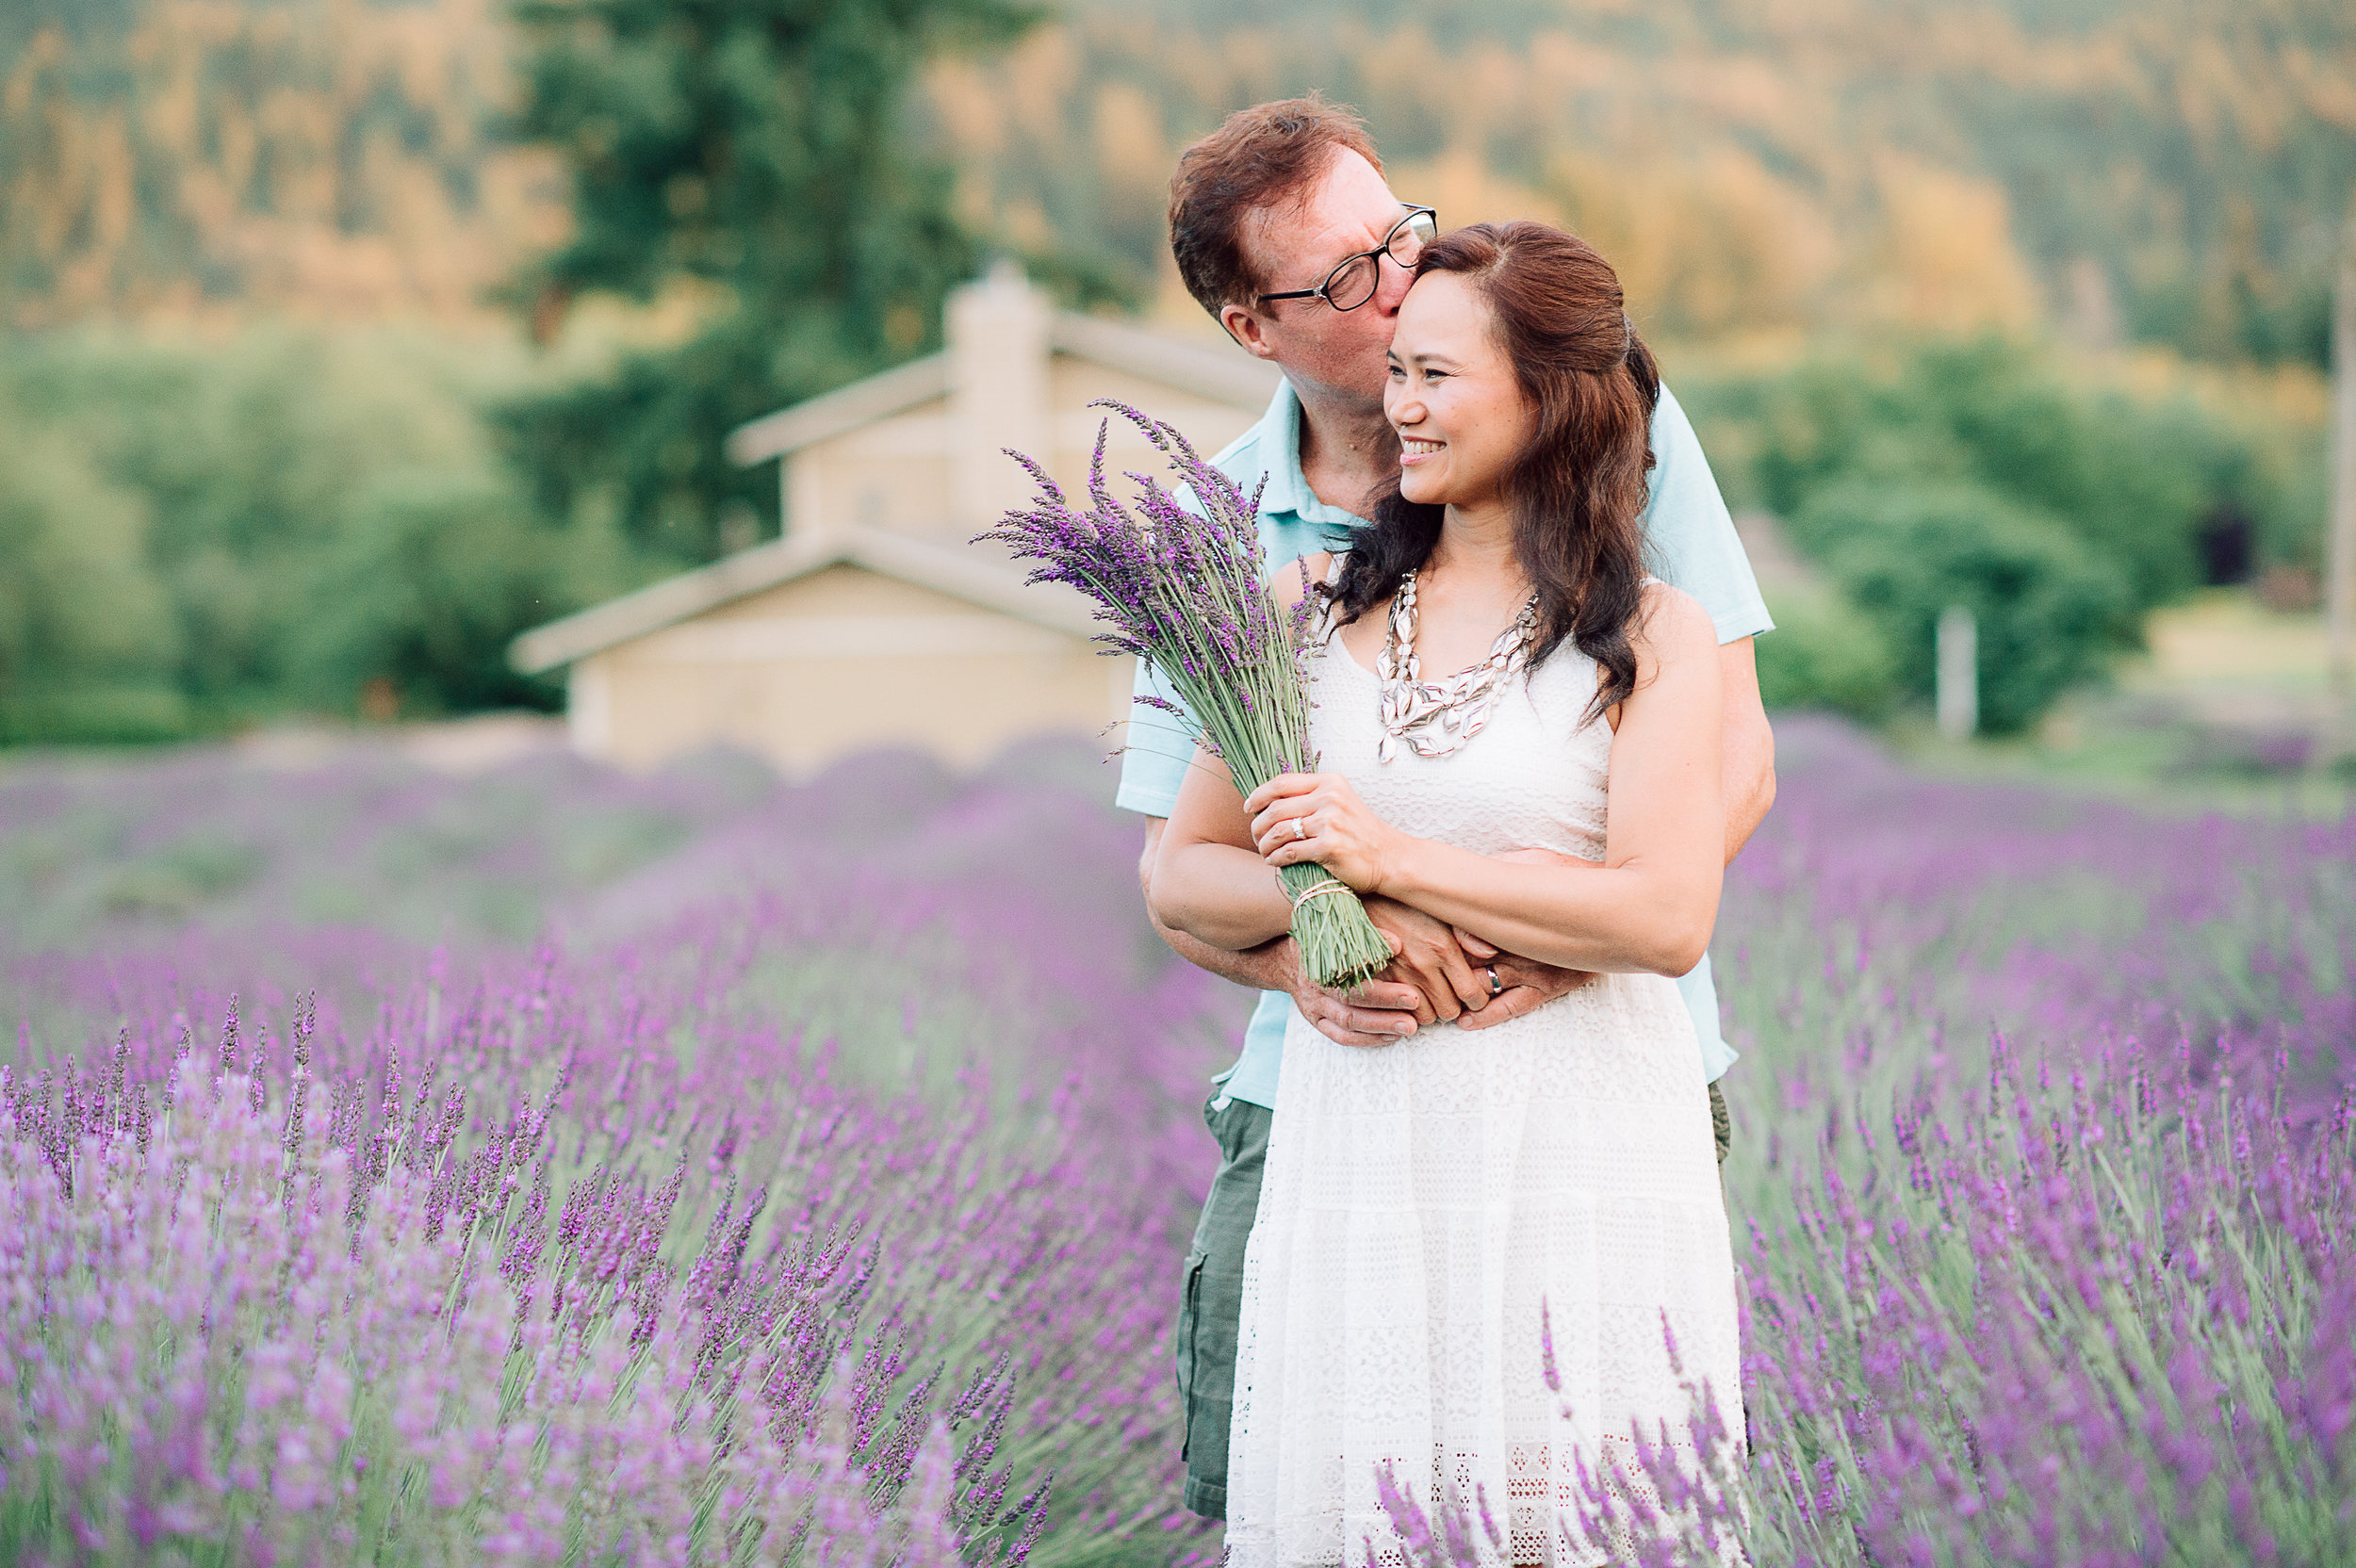 engagement_lavenderfield_youseephotography_LidiaOtto (73).jpg